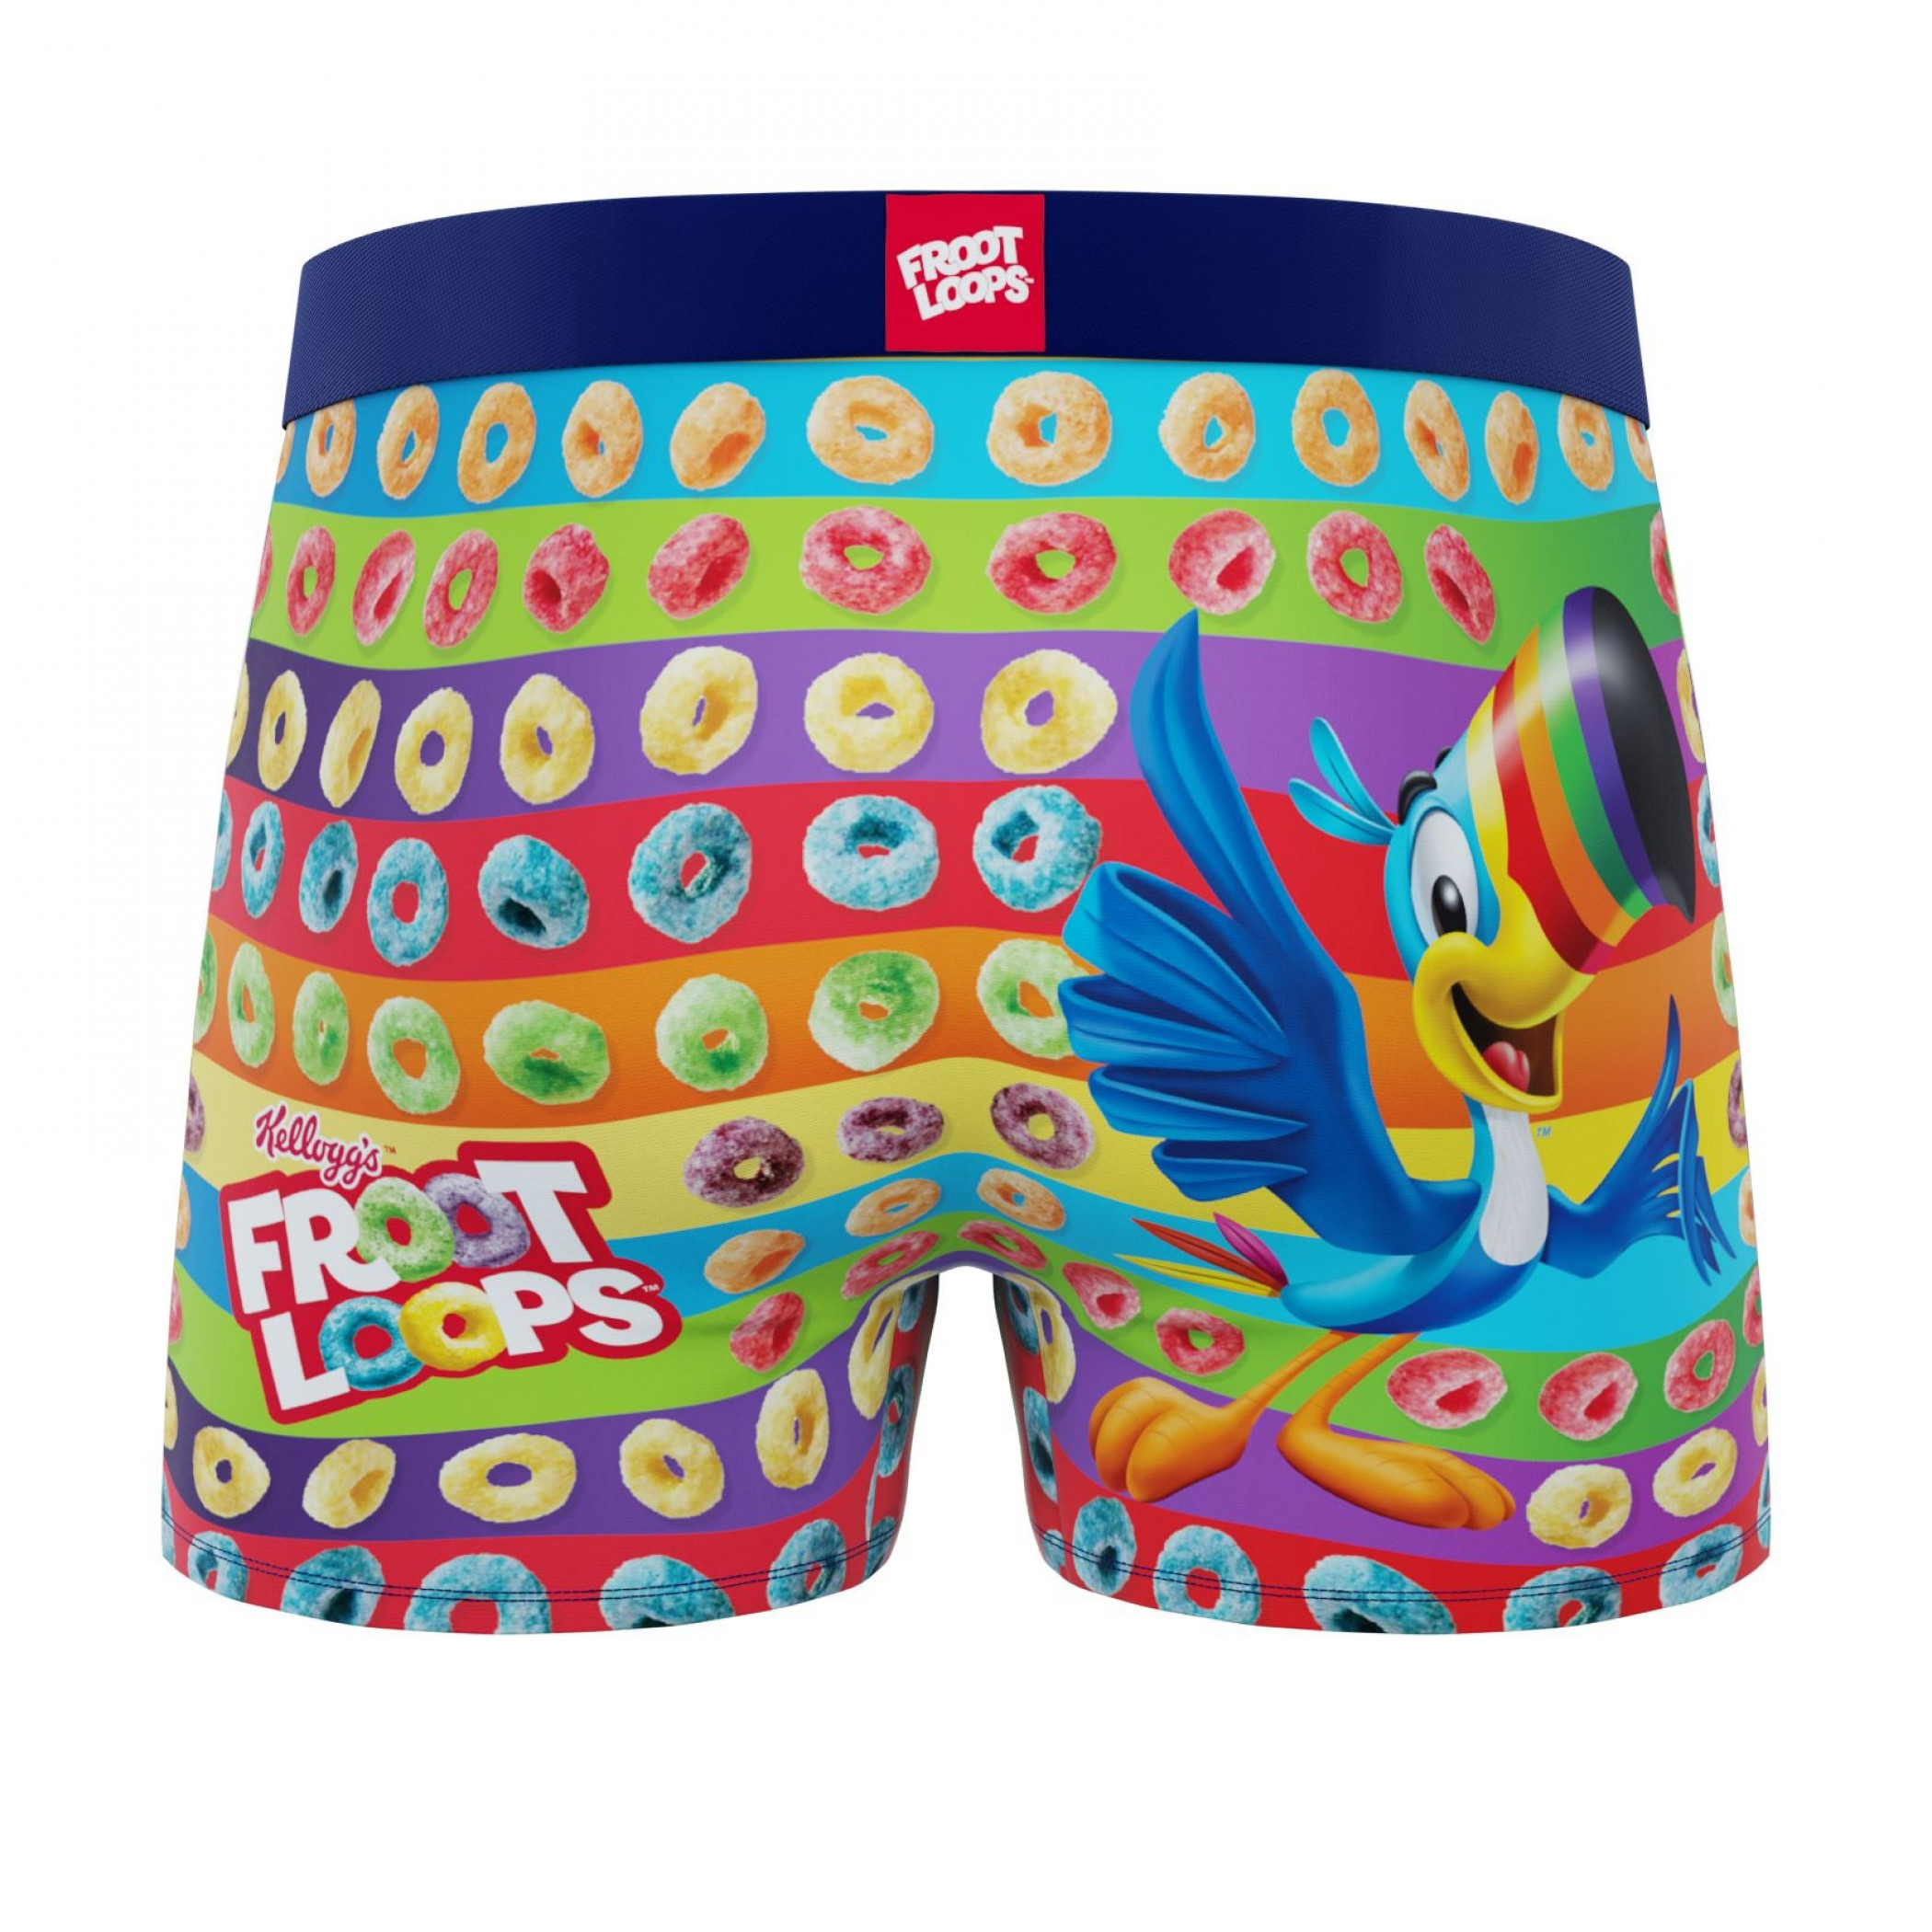 Froot Loops Colorful Toucan Sam Men's Crazy Boxer Briefs Shorts